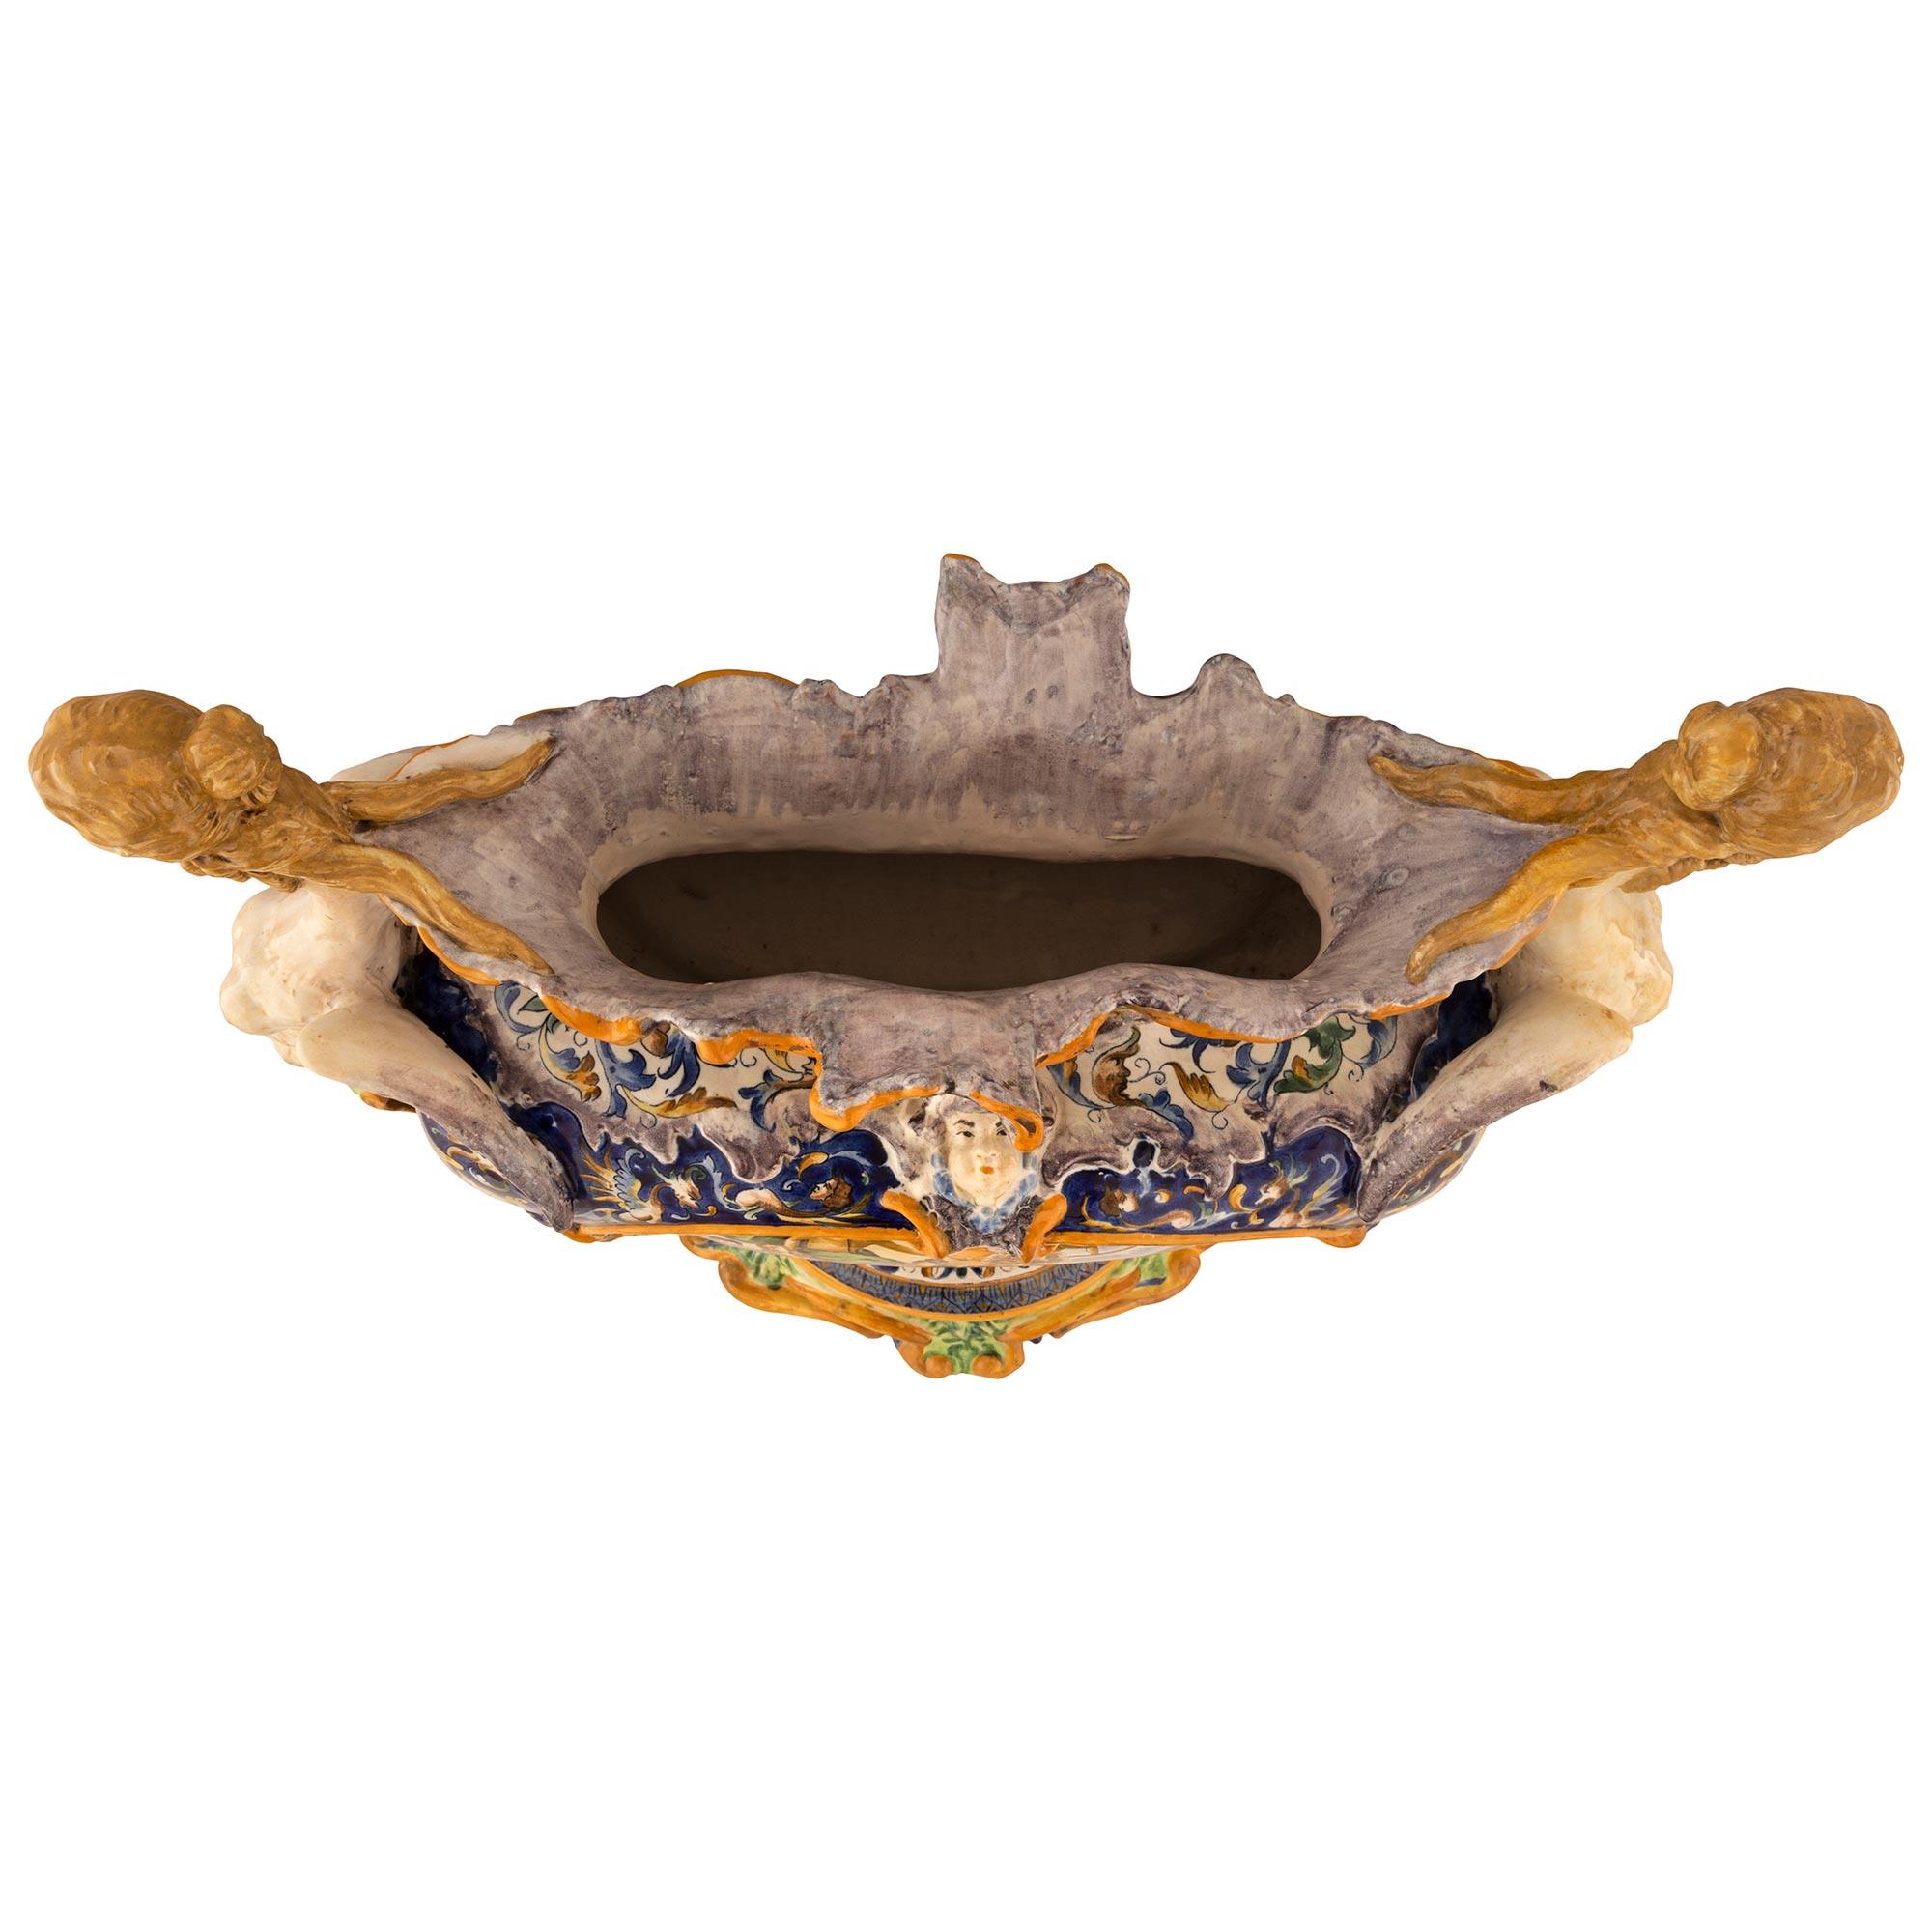 A beautiful and most decorative Italian 19th century Majolica porcelain centerpiece. The oblong shaped centerpiece is raised by lovely scalloped movements at the base with most decorative scrolled foliate designs and a lovely mottled wrap around